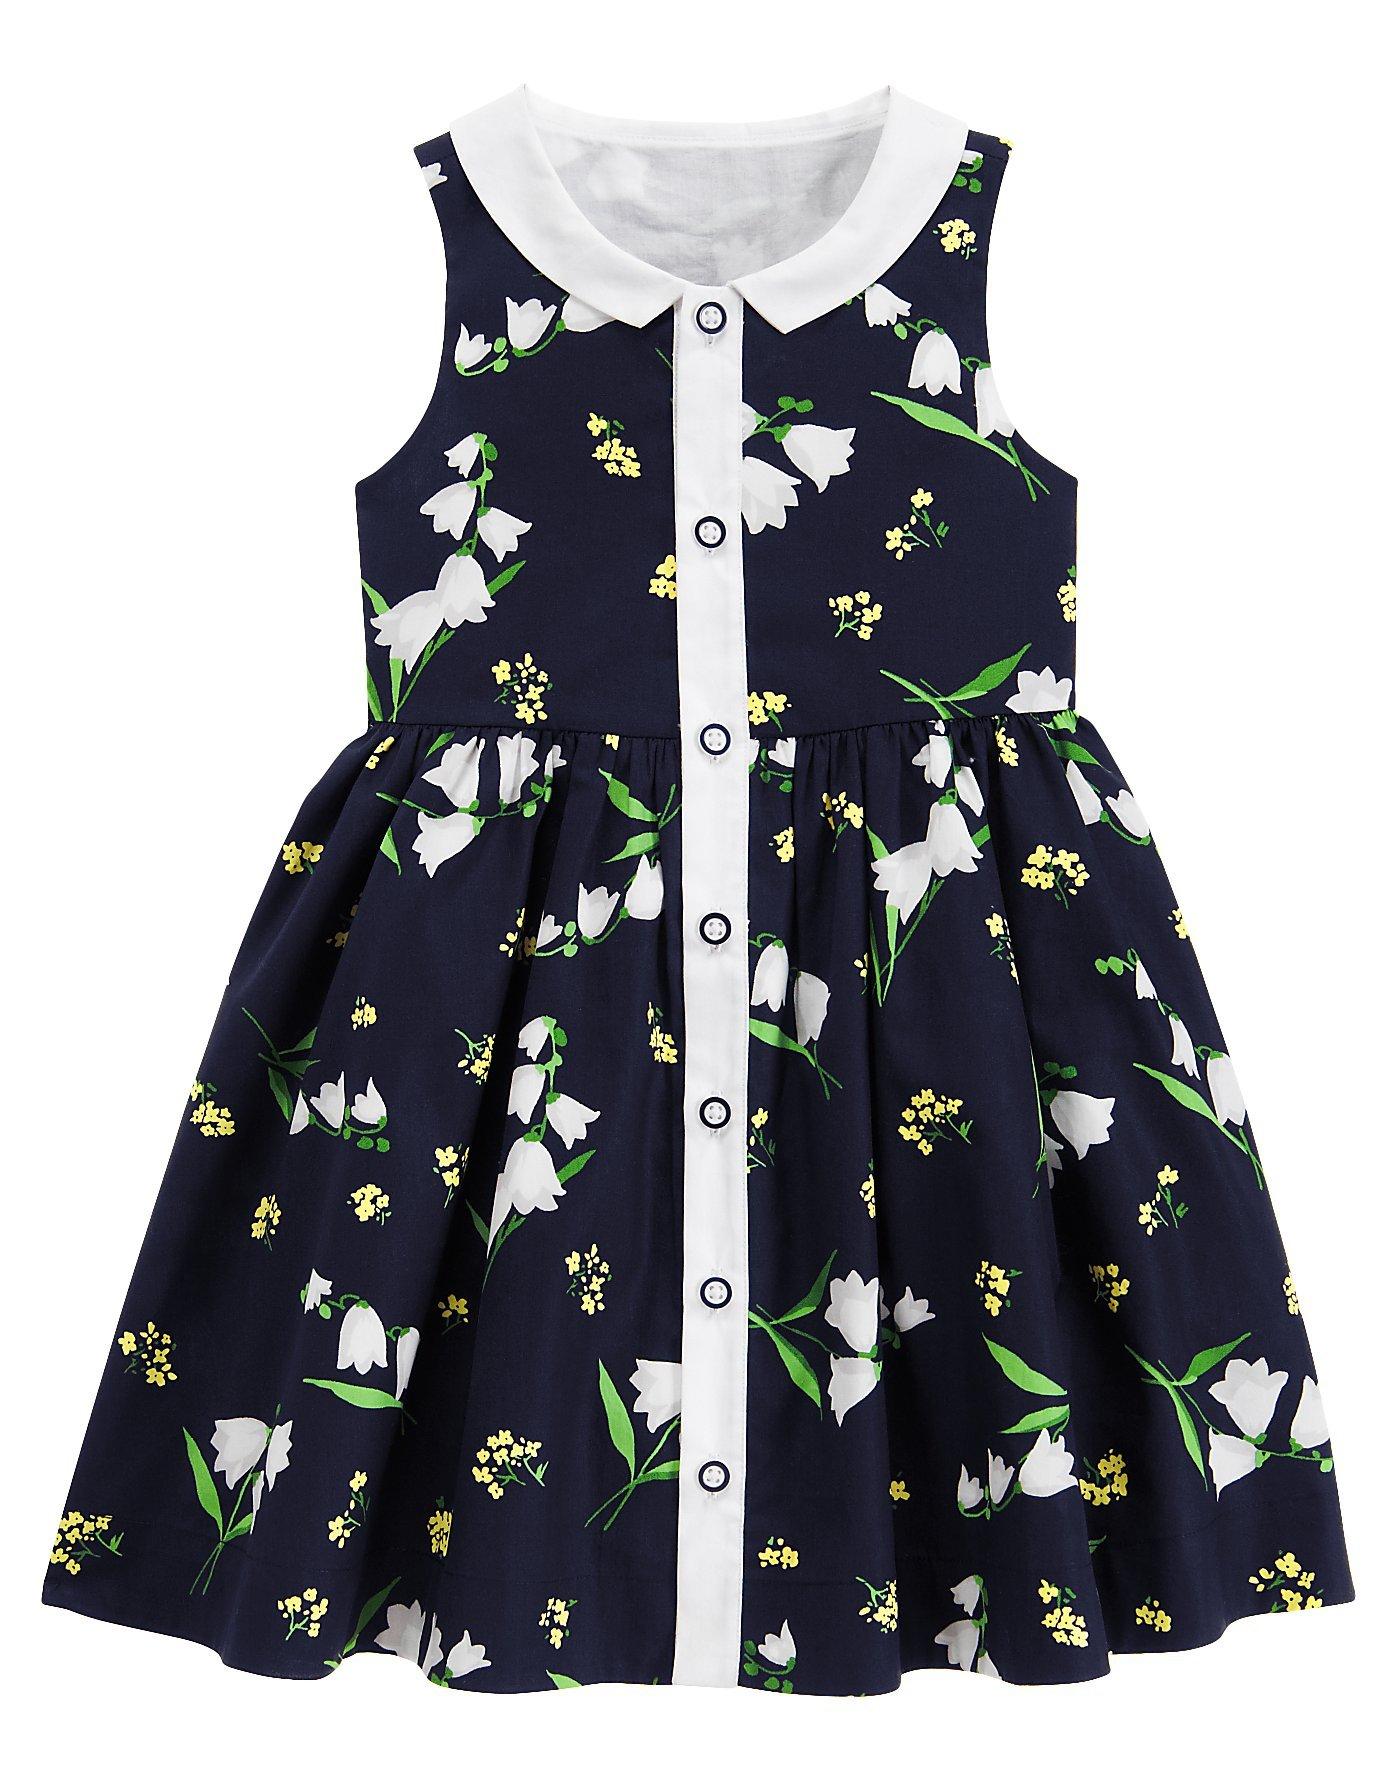 Lily Of The Valley Lily Dress at JanieandJack